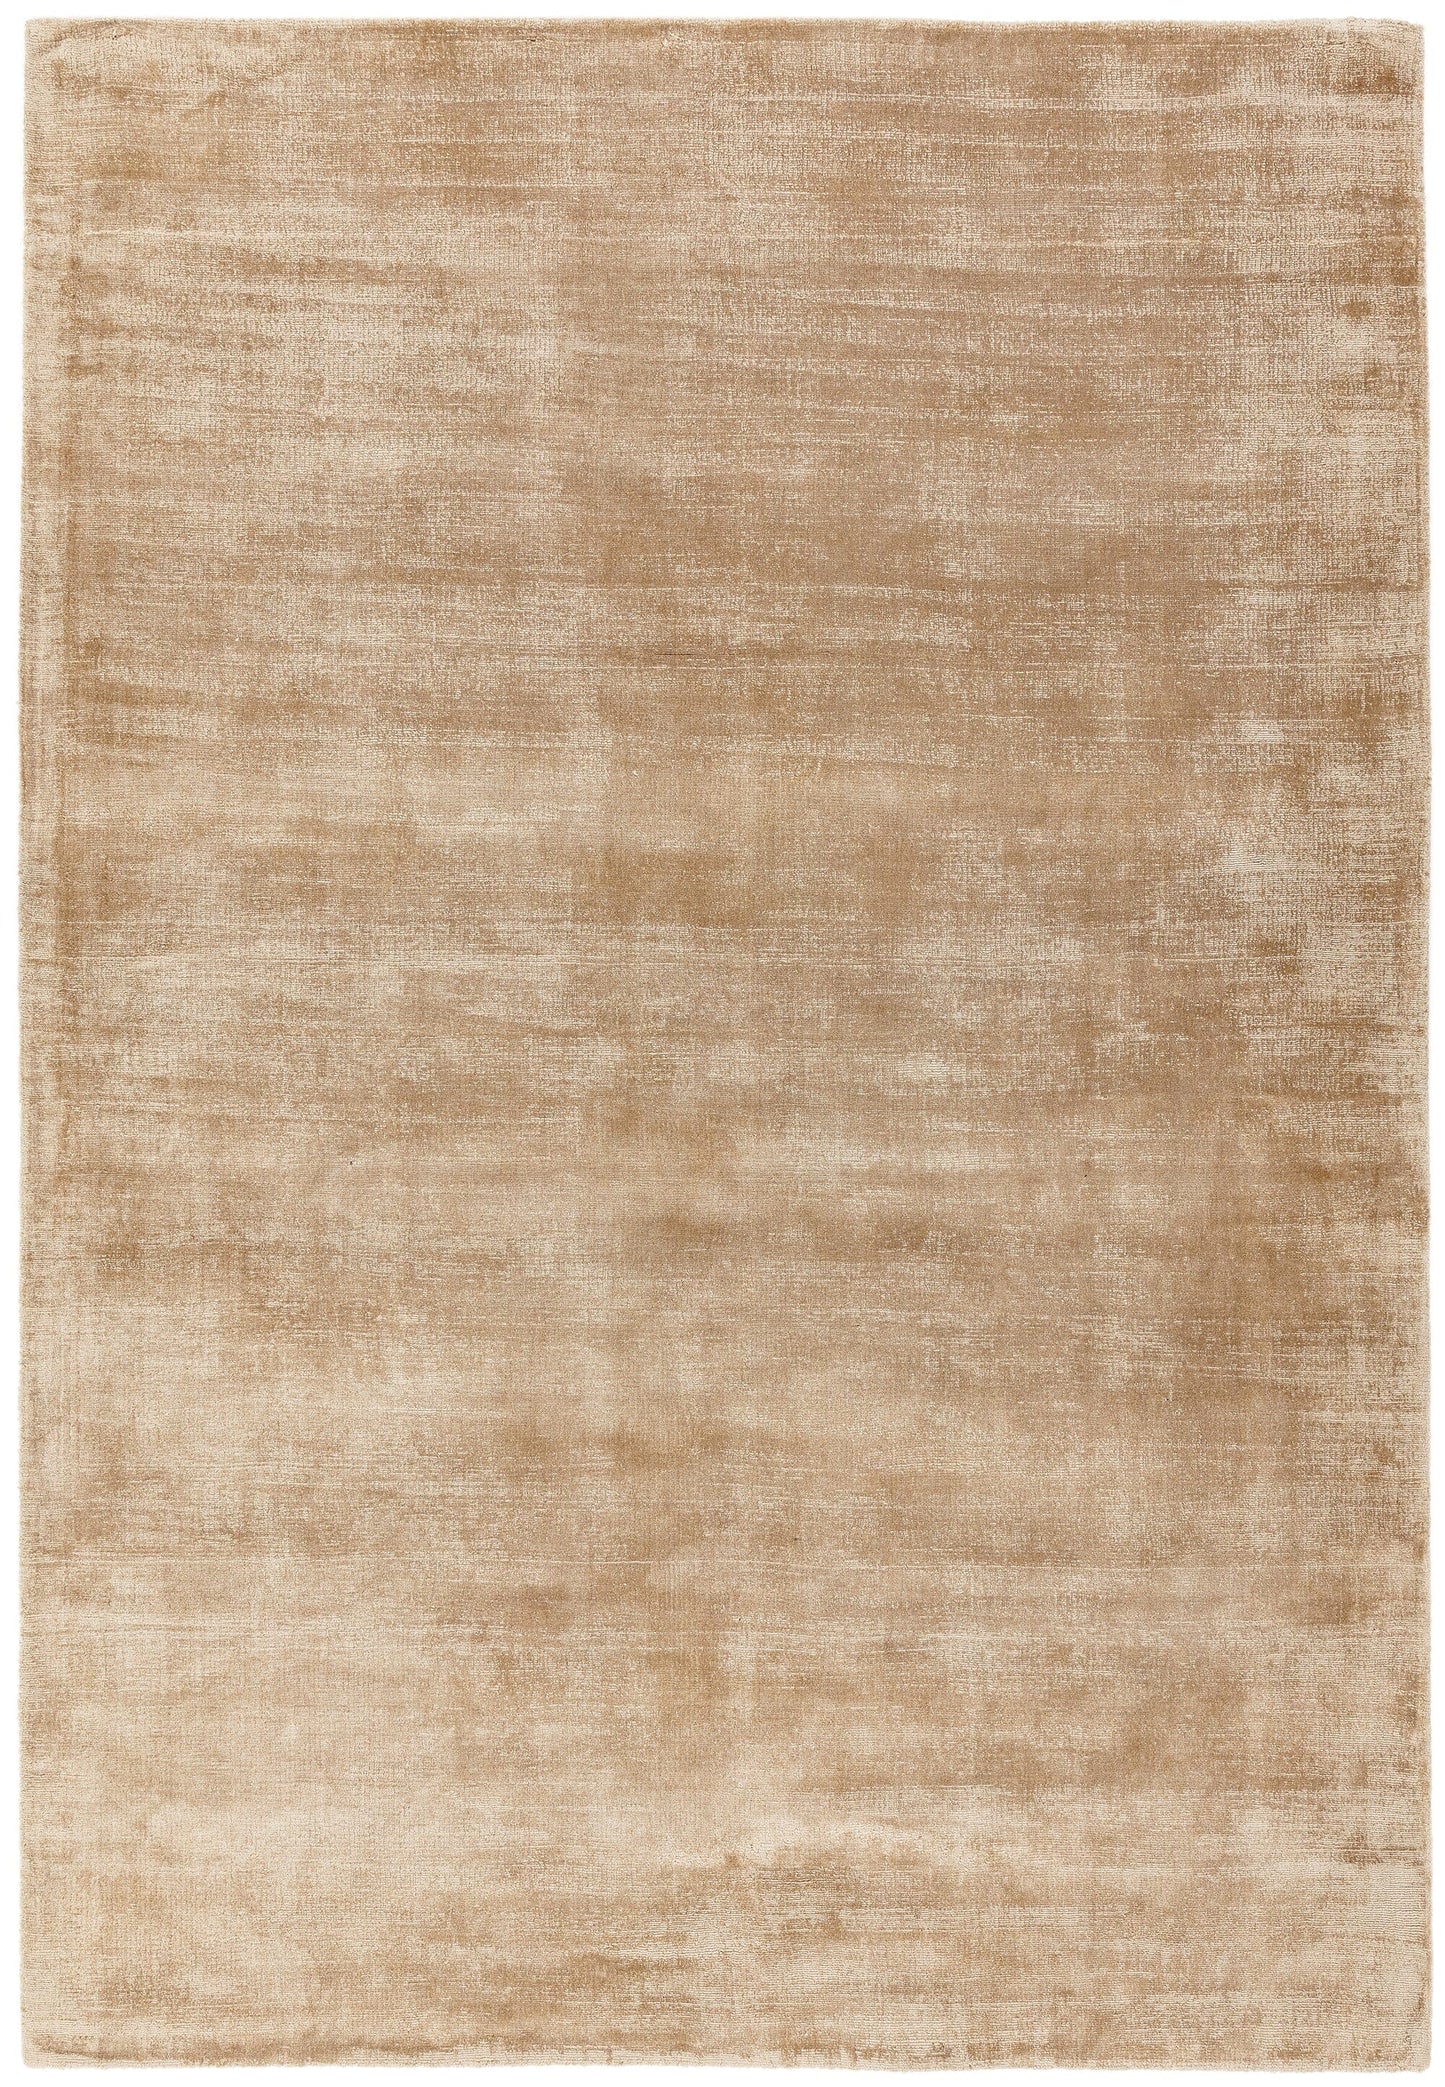 Asiatic Carpets Blade Hand Woven Runner Champagne - 66 x 240cm